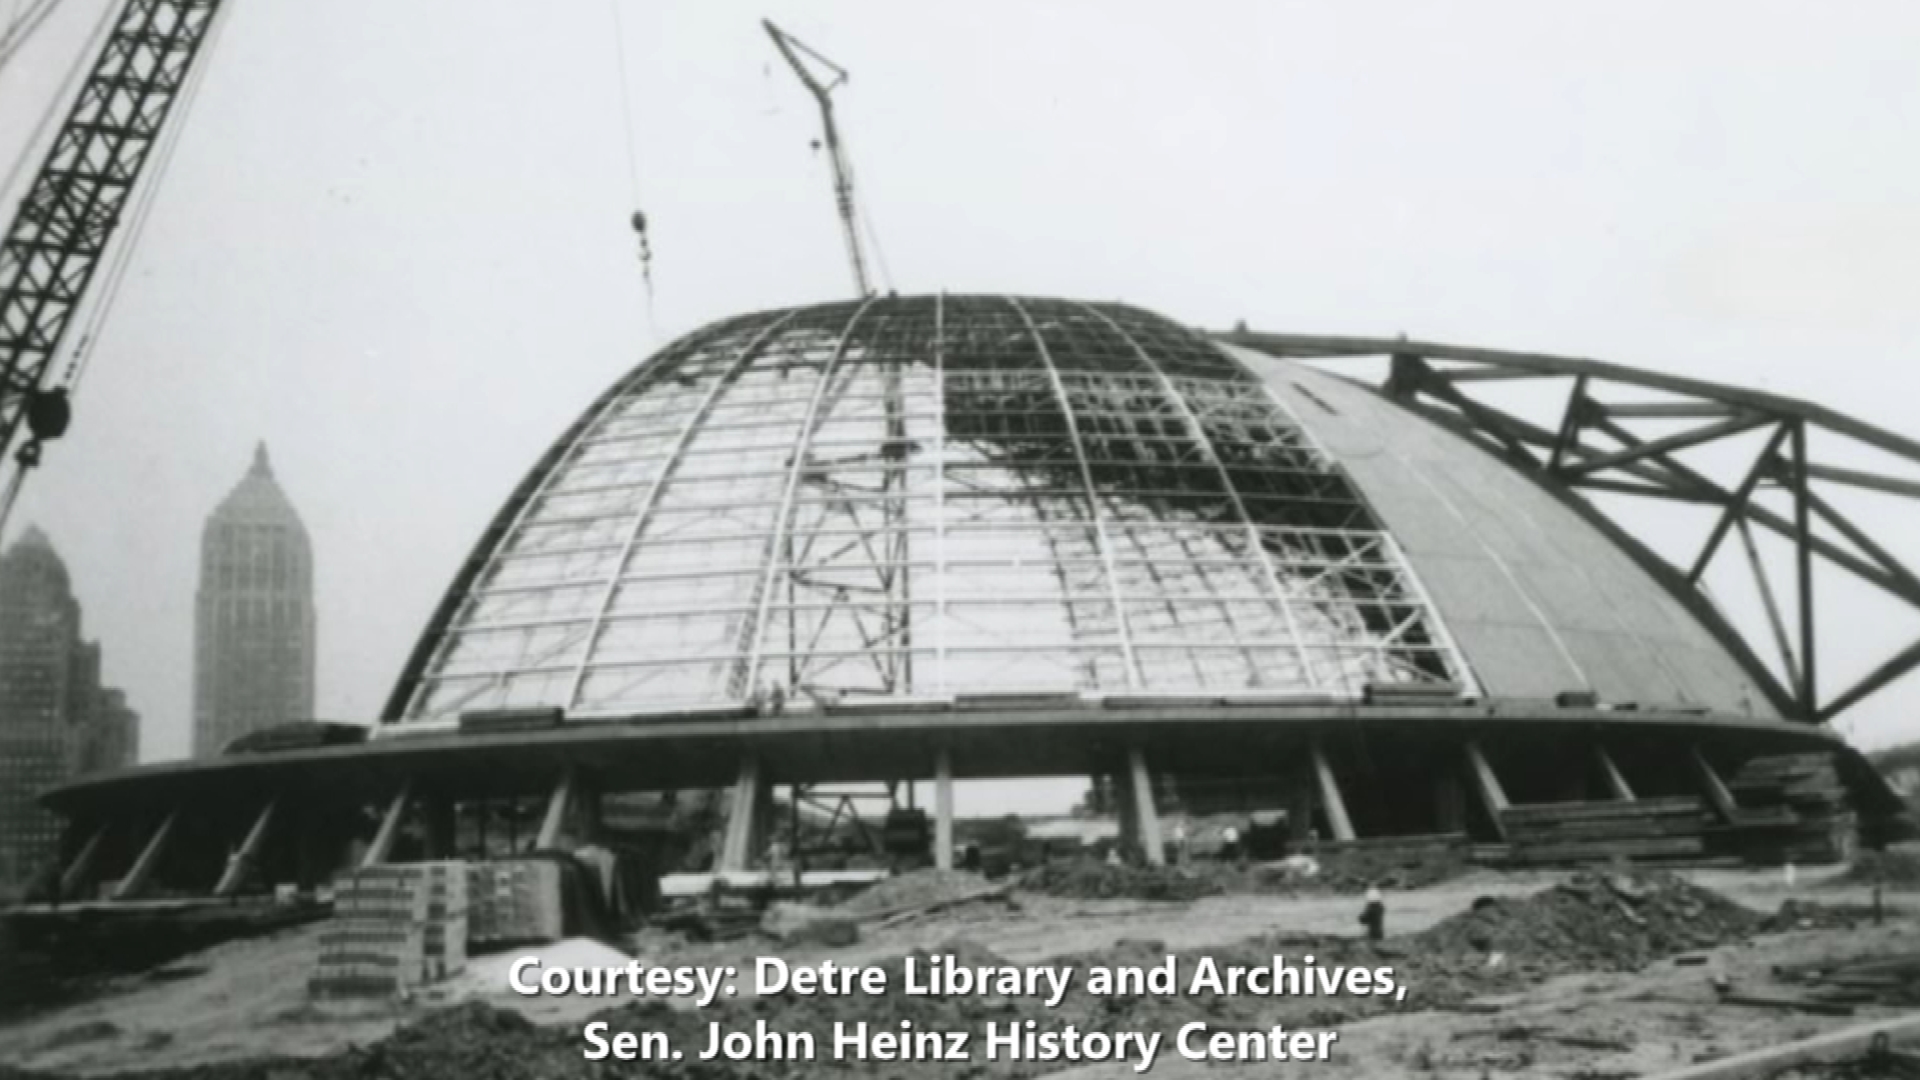 WQED Pittsburgh - A Civic Arena #TBT back to 1963! [via